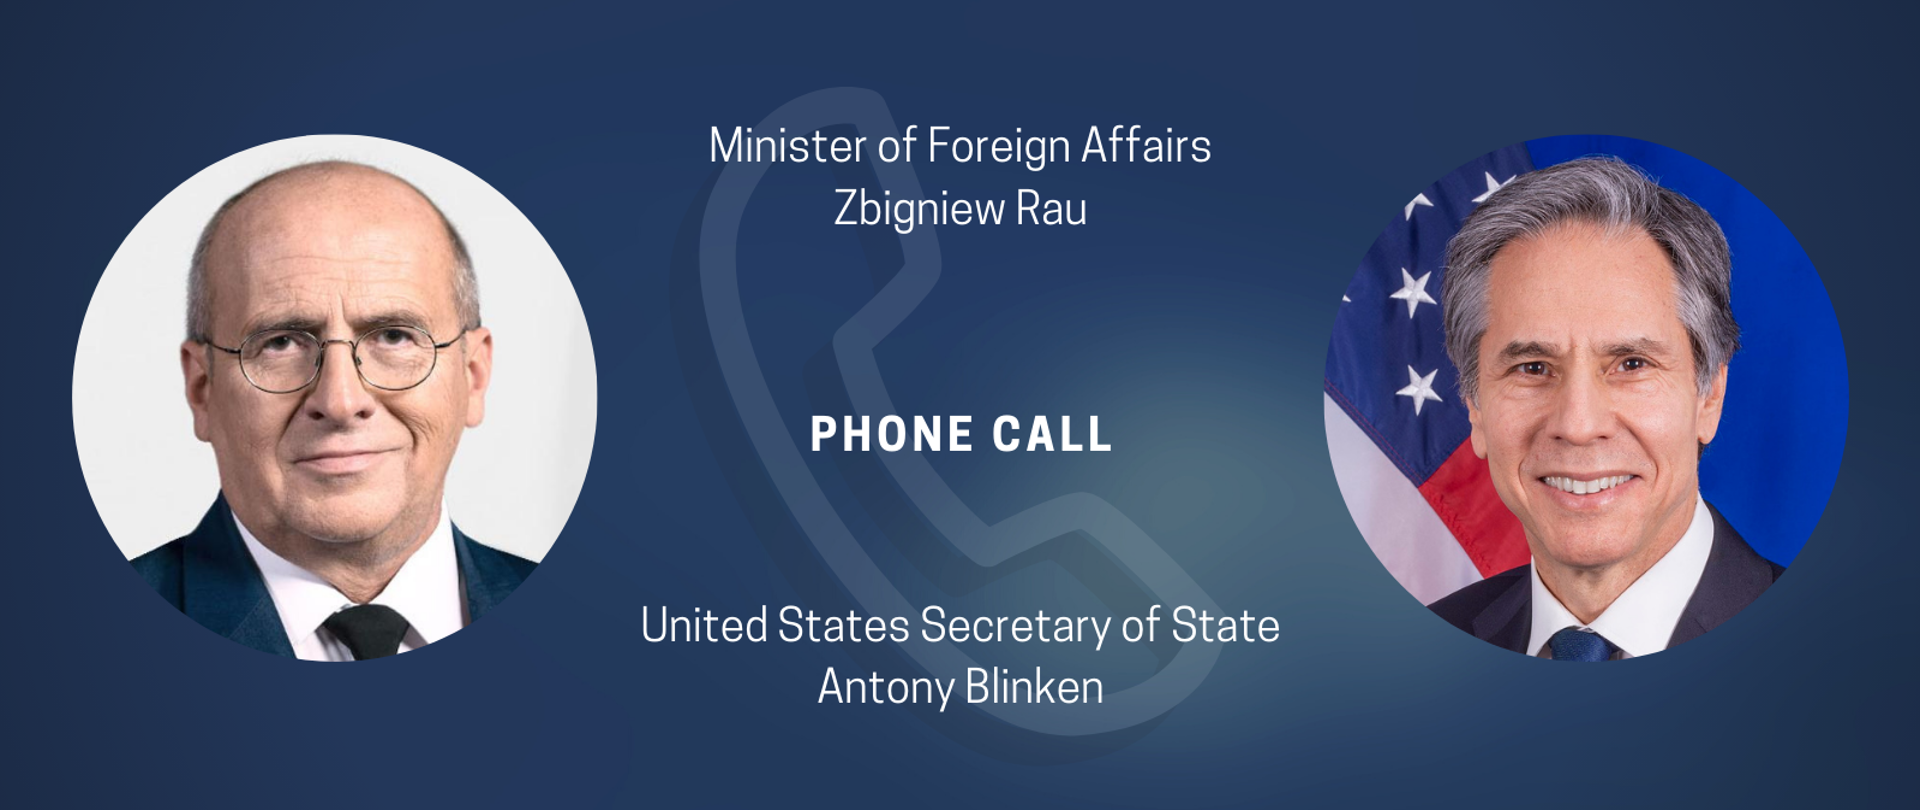 Minister Rau’s call with US Secretary of State Blinken